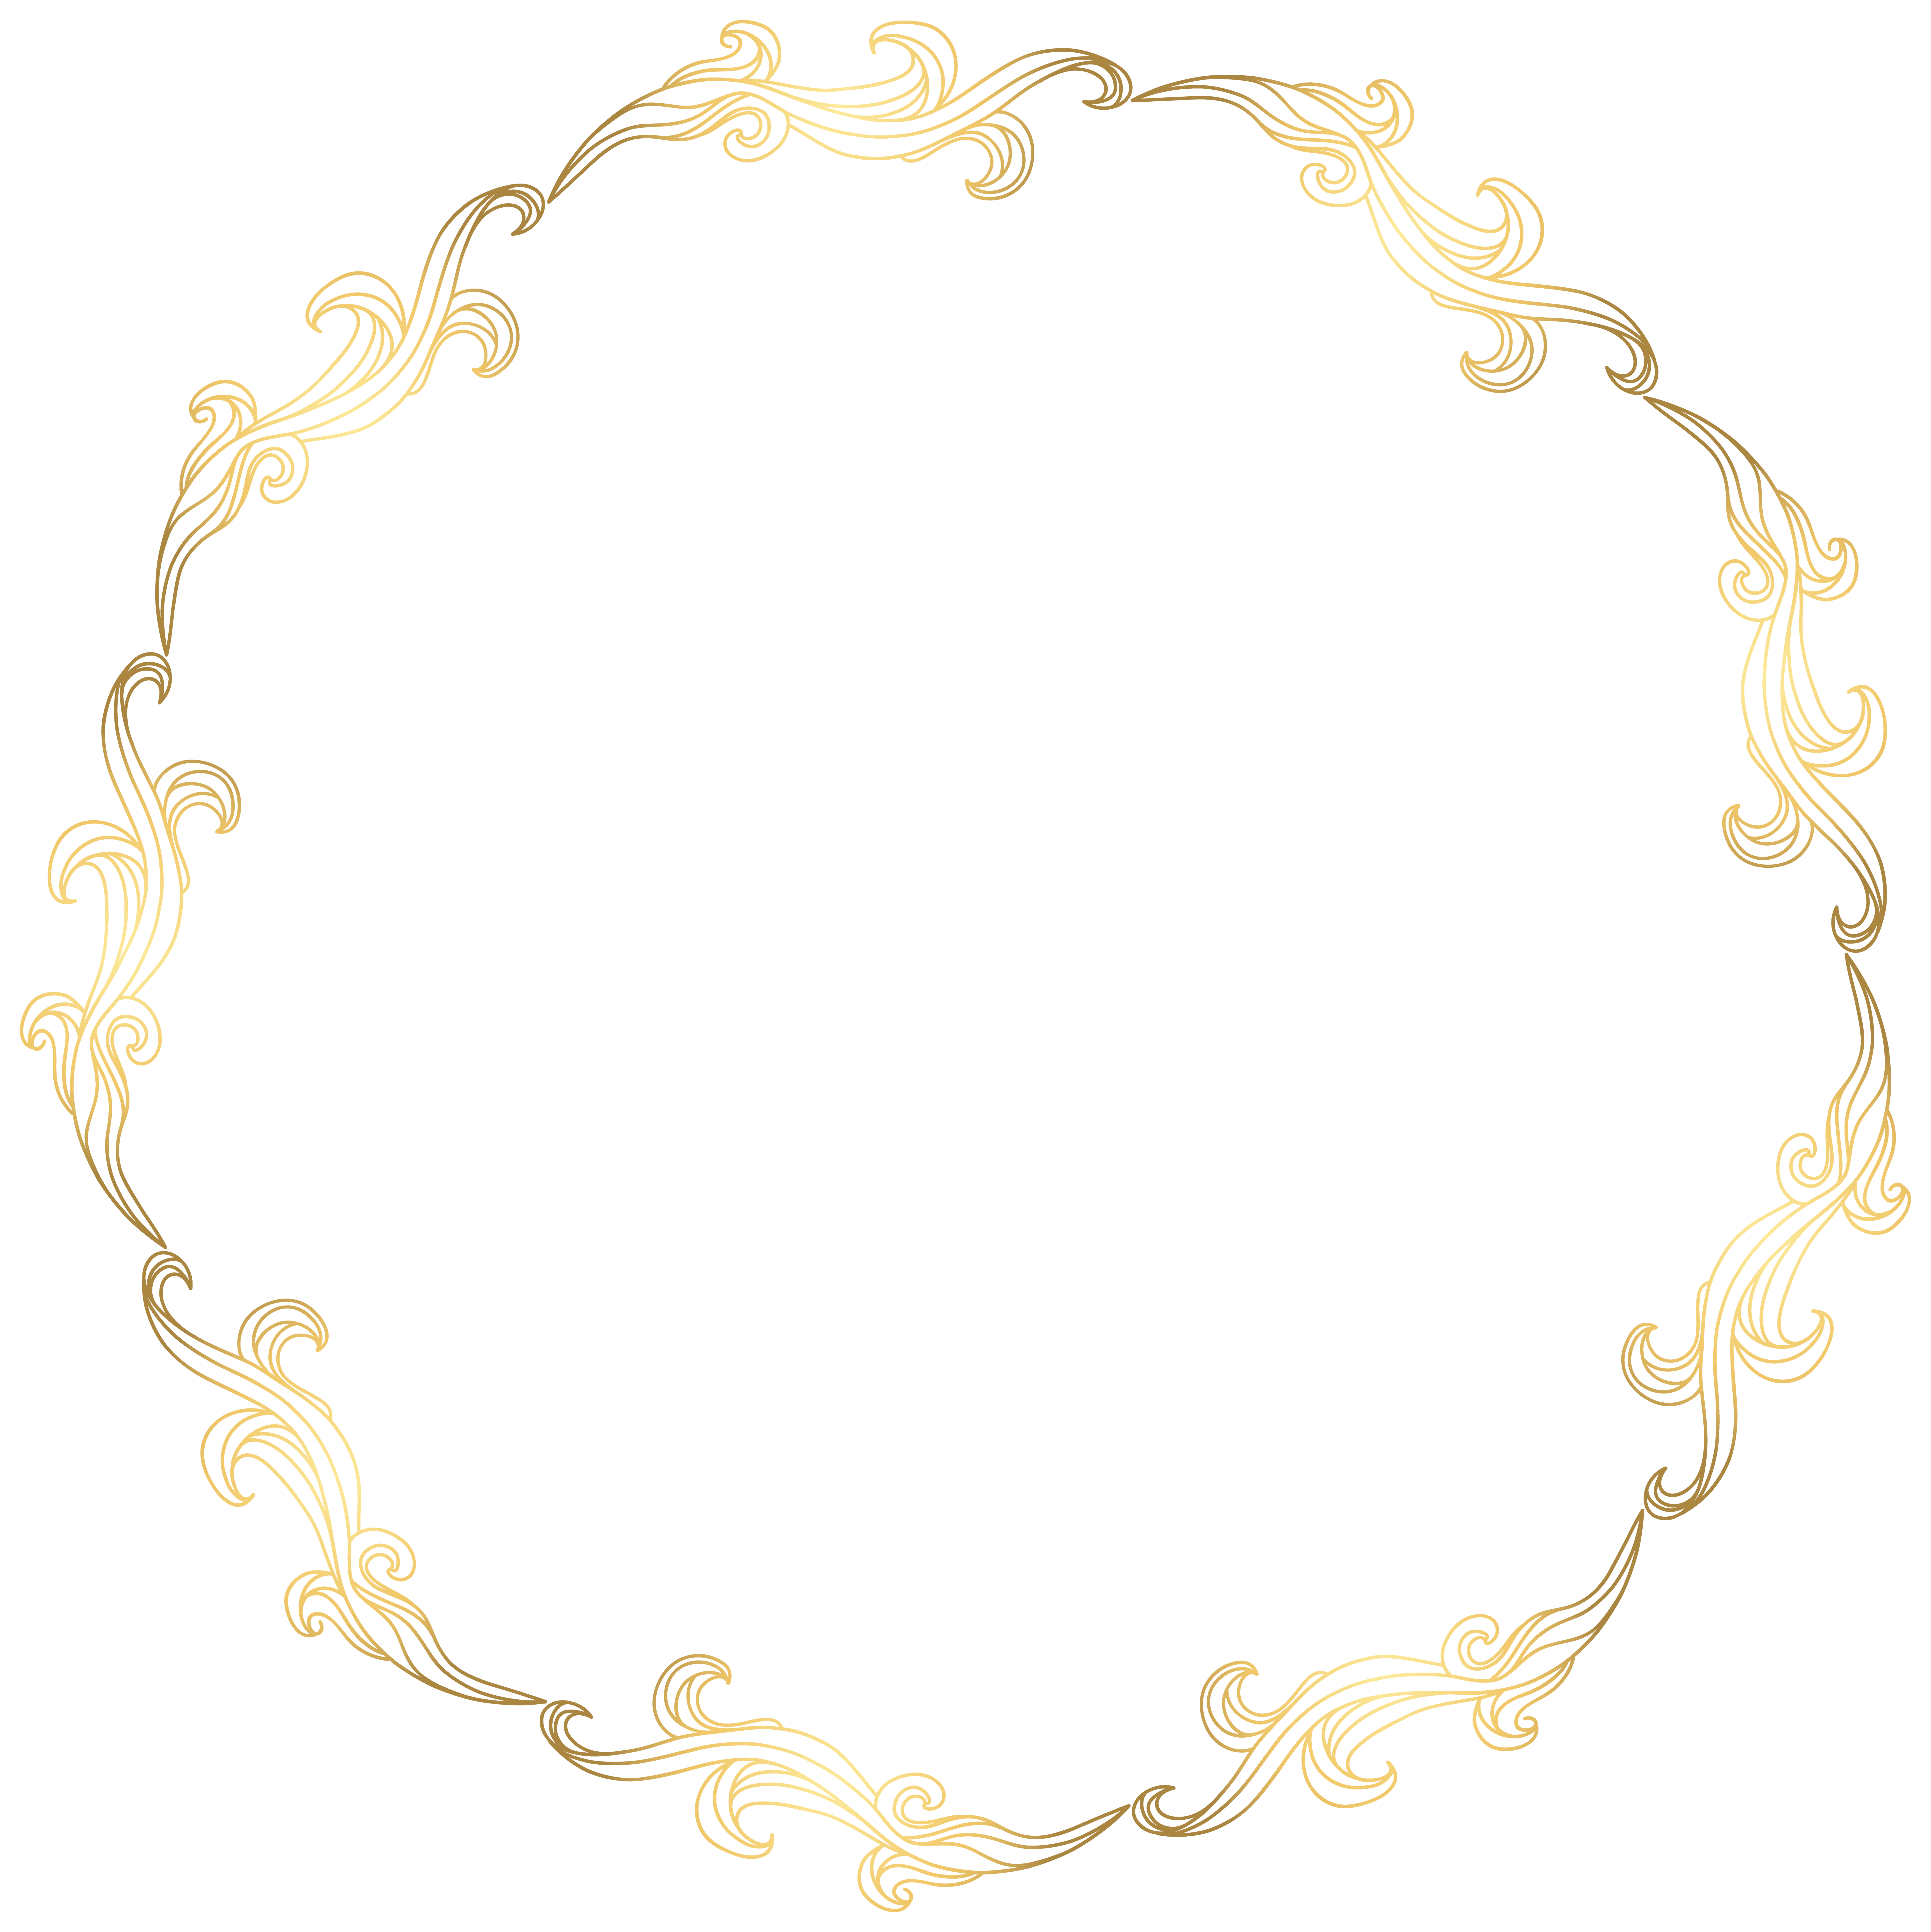 Floral Gold Round Border Png Transparent Clip Art Image Gallery Yopriceville High Quality Images And Transparent Png Free Clipart Download this leaves border frame with anadem, frame, leaves, round png clipart image with transparent background or psd file for free. gallery yopriceville